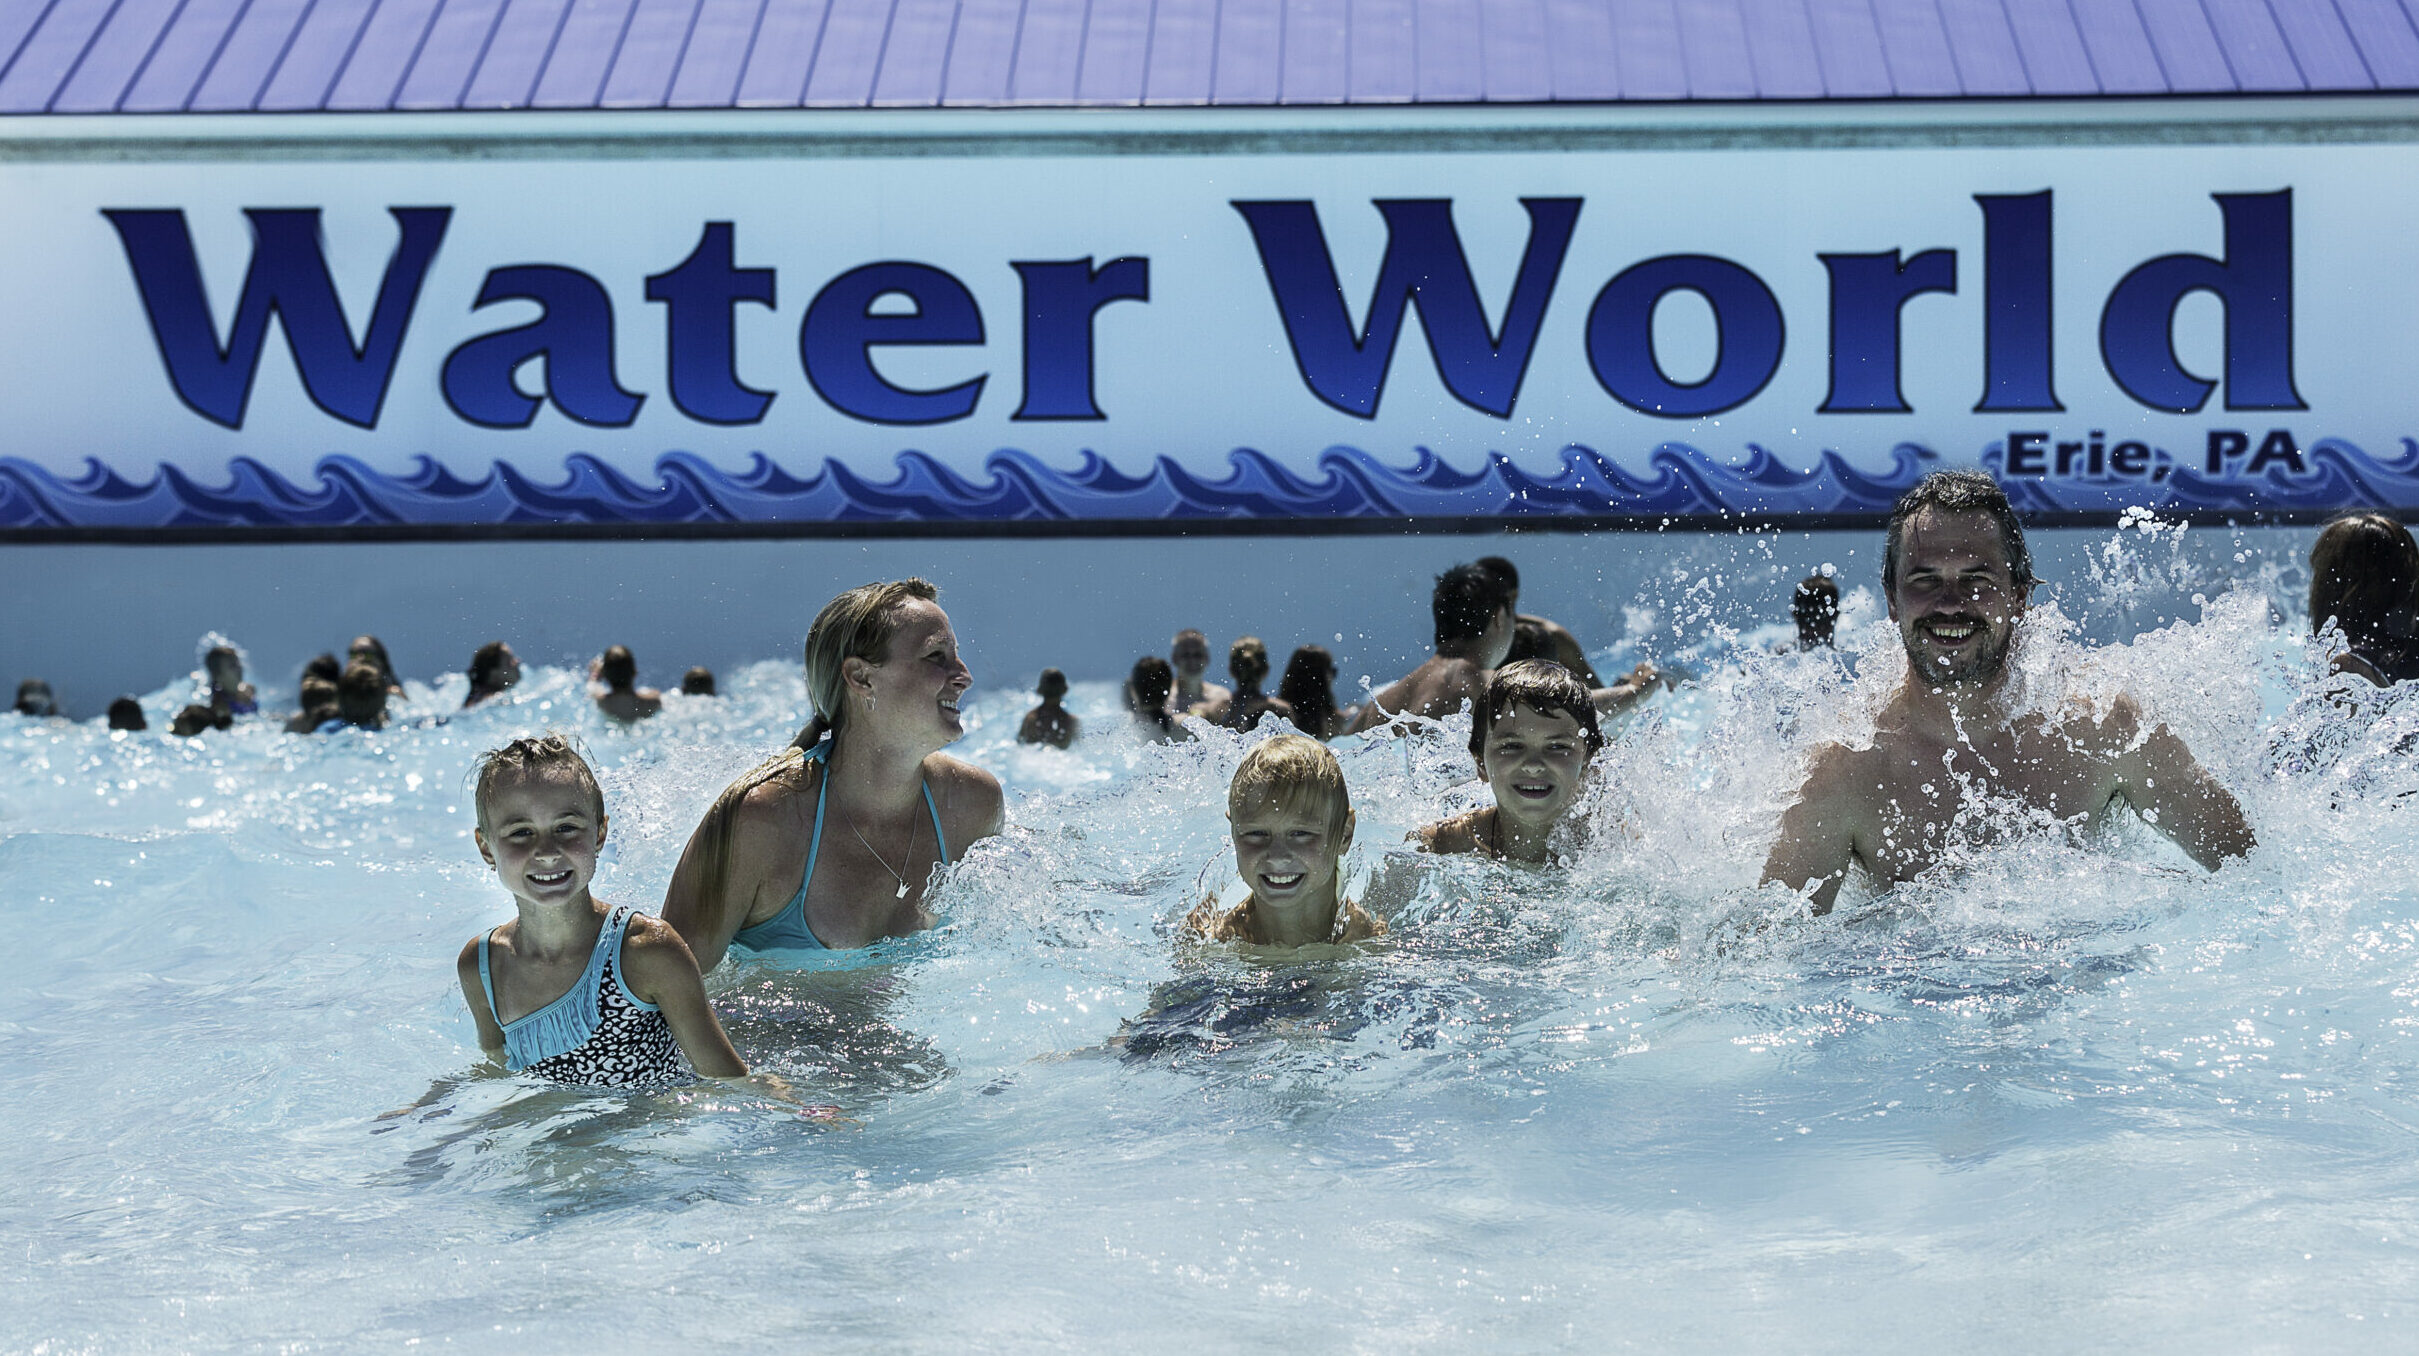 A family enjoying the Wave Pool in Water World.